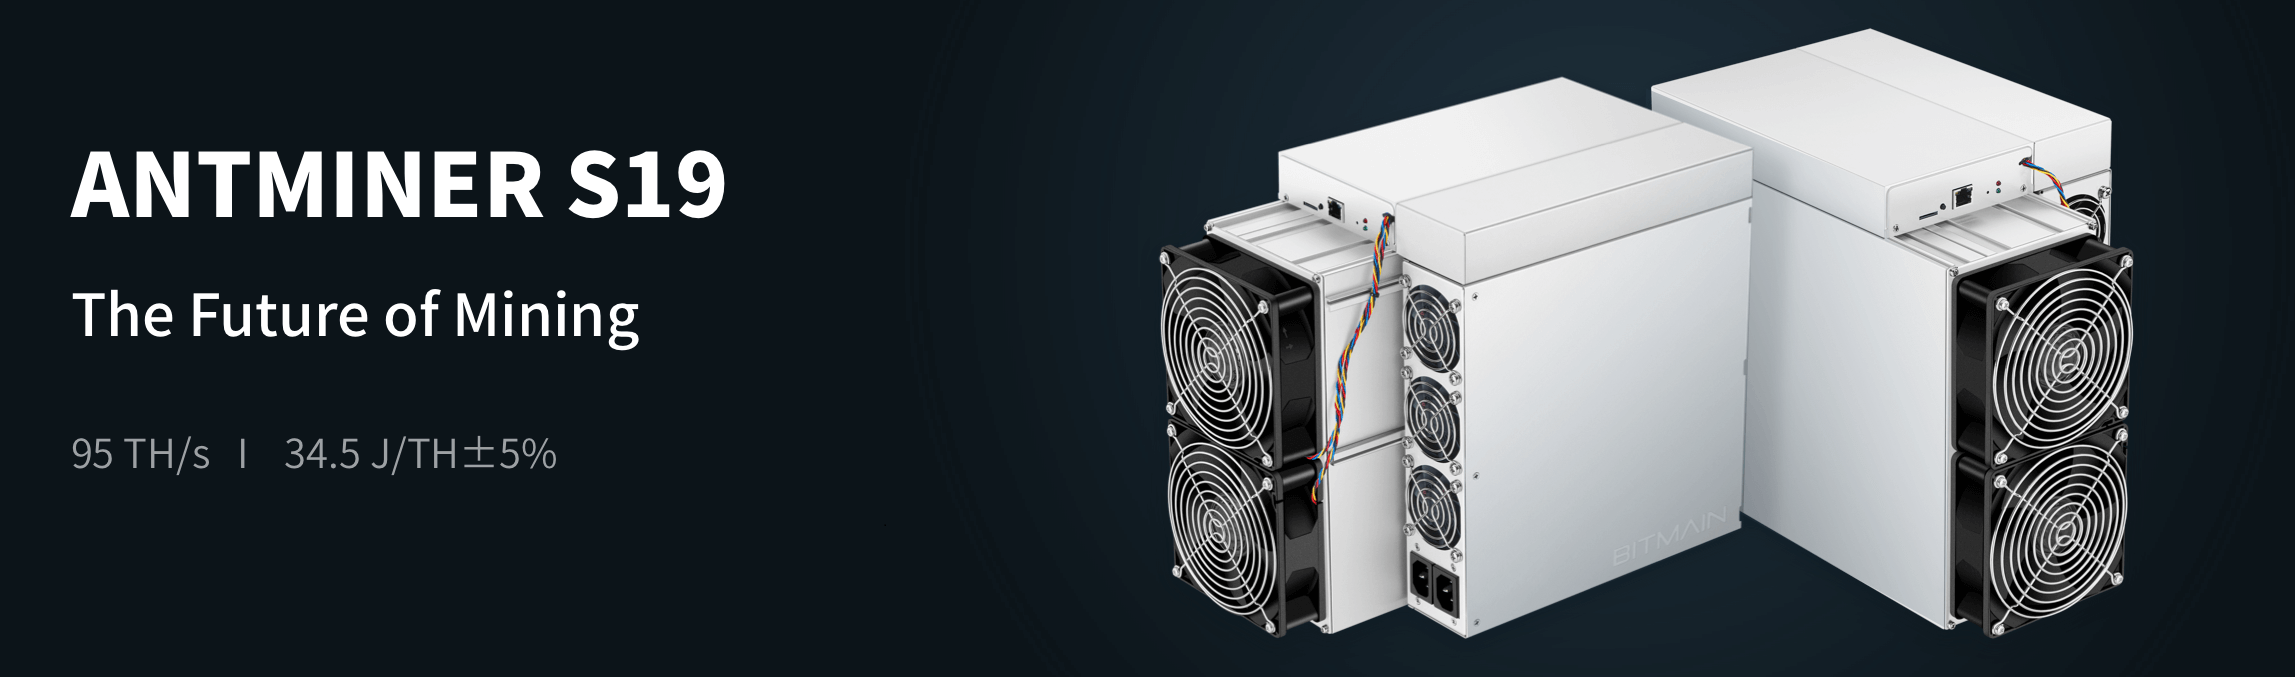 Antminer t21 190 th s. Bitmain Antminer s19 95th/s. Bitmain Antminer s19 Pro. Antminer s19 95. Асик майнер Bitmain Antminer l7.